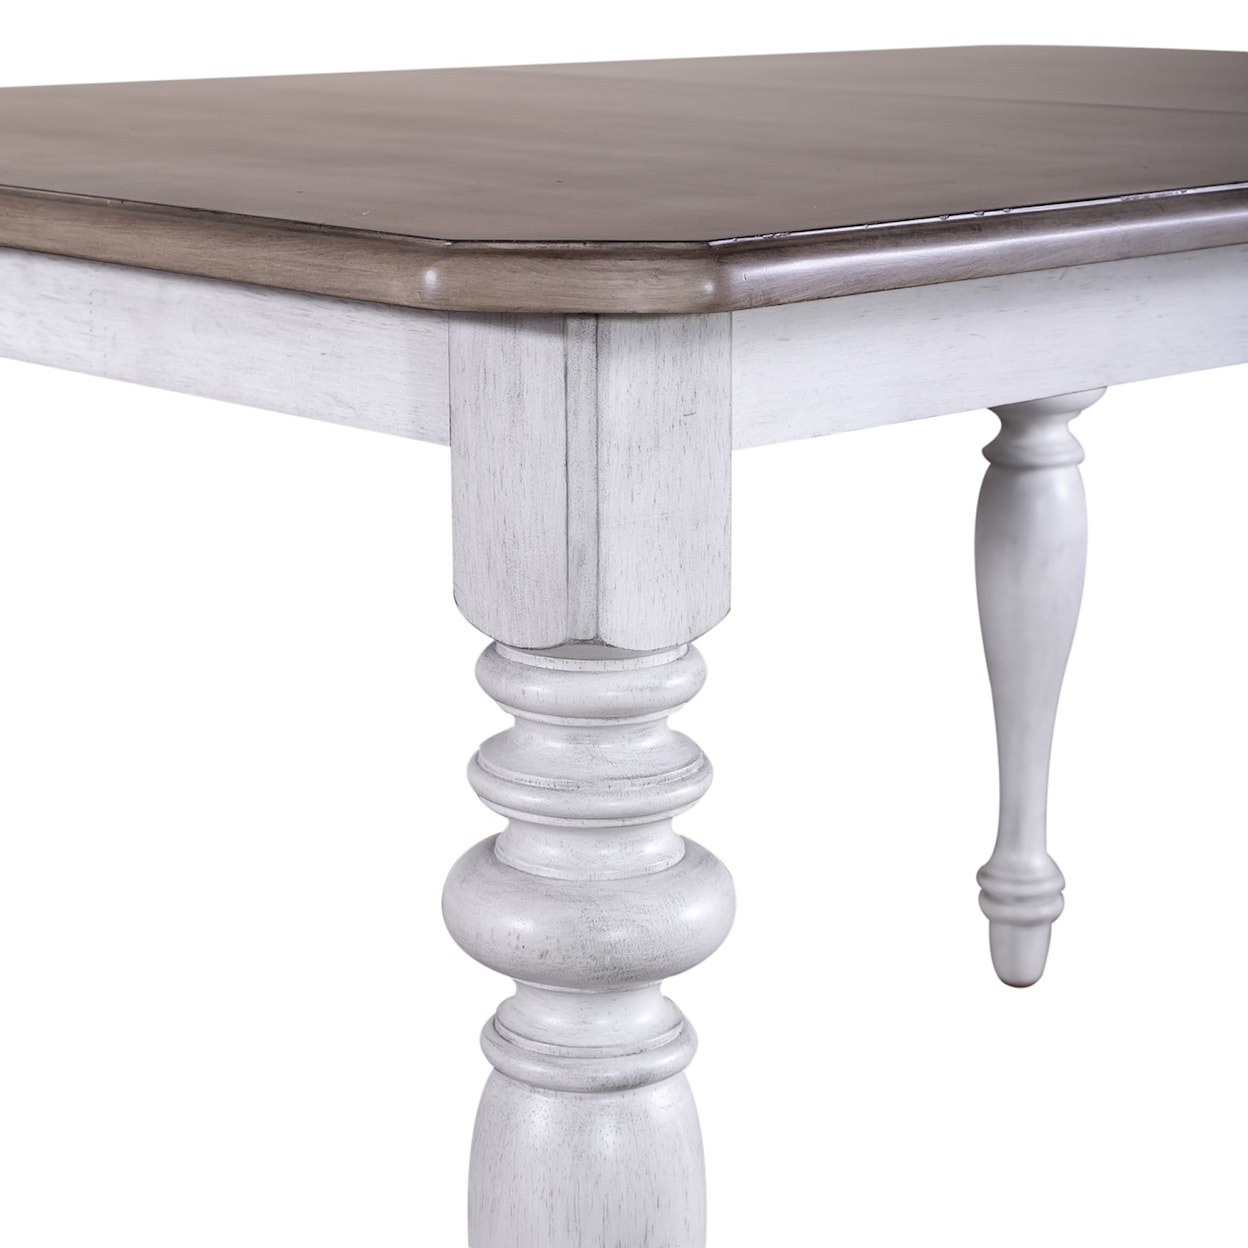 Liberty Furniture Ocean Isle 303w T3872 Farmhouse Rectangular Dining Table With Leaf Inserts